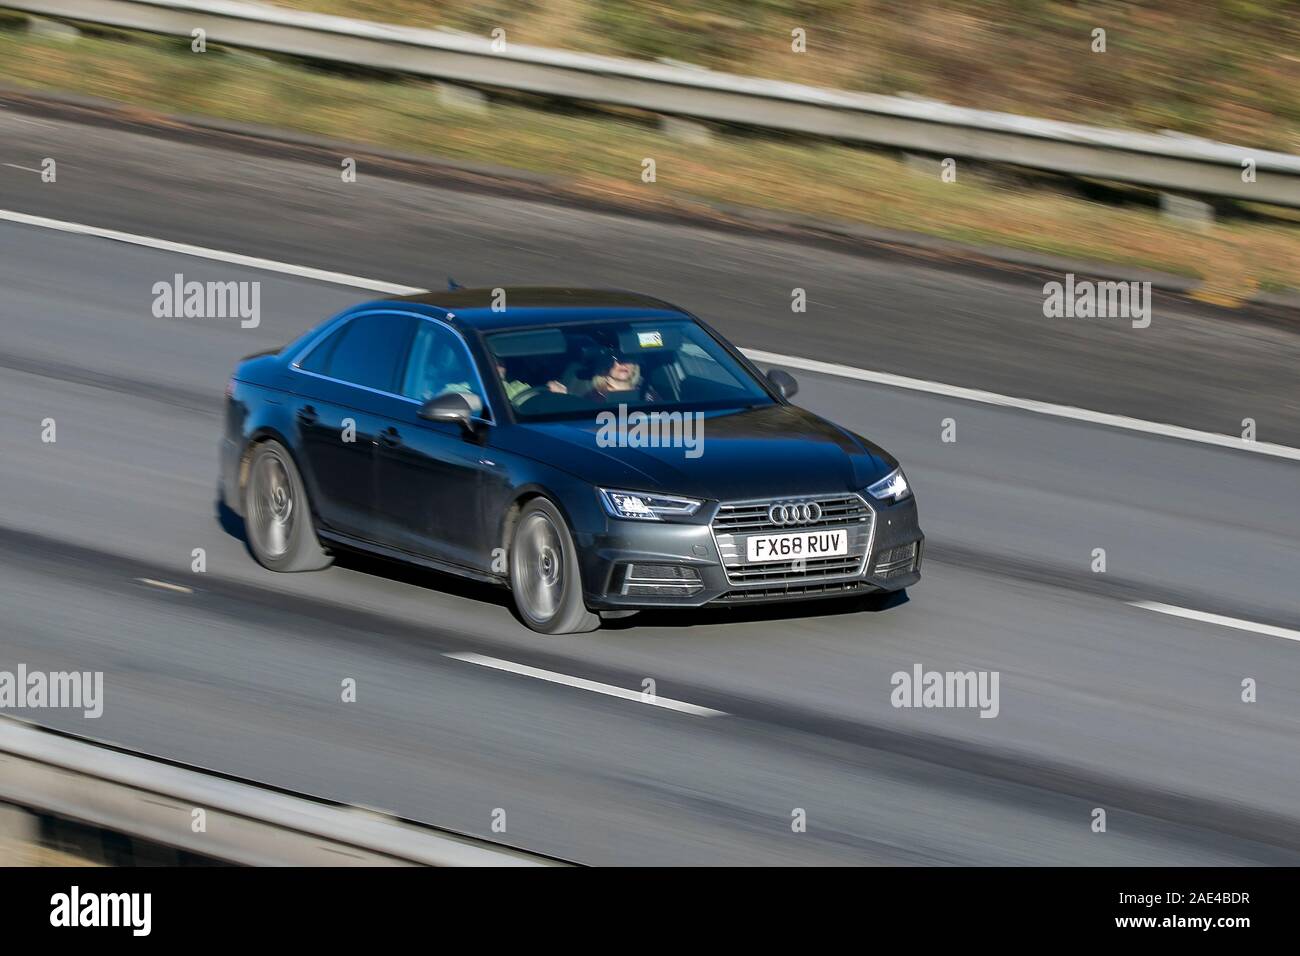 Blurred moving car AUDI A4 S Line Tdi S-A traveling at speed on the M61 motorway Slow camera shutter speed vehicle movement Stock Photo